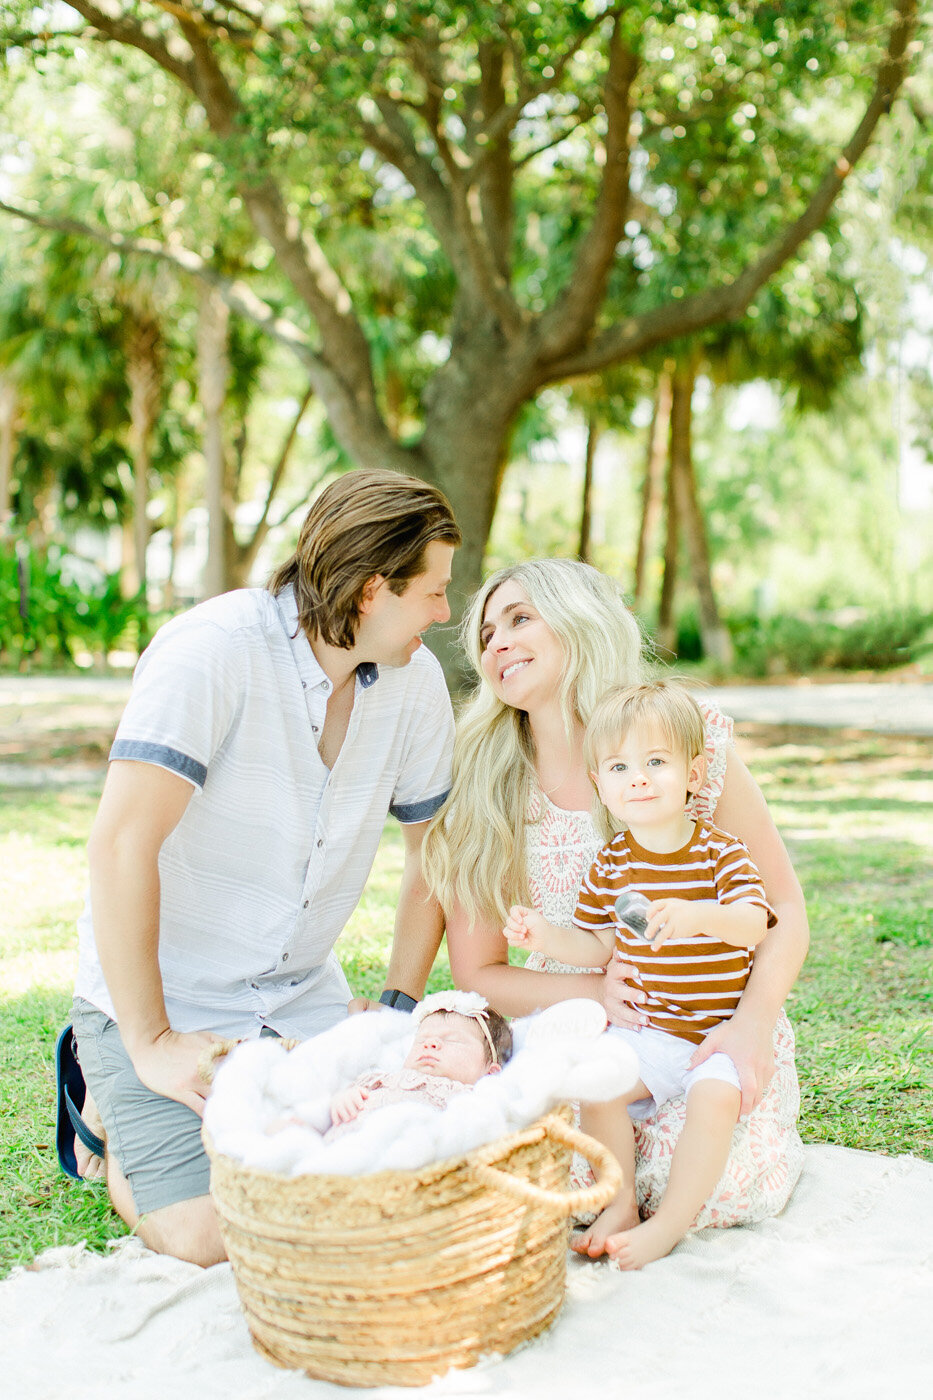 Tampa Family Photographer - Ailyn LaTorre 02